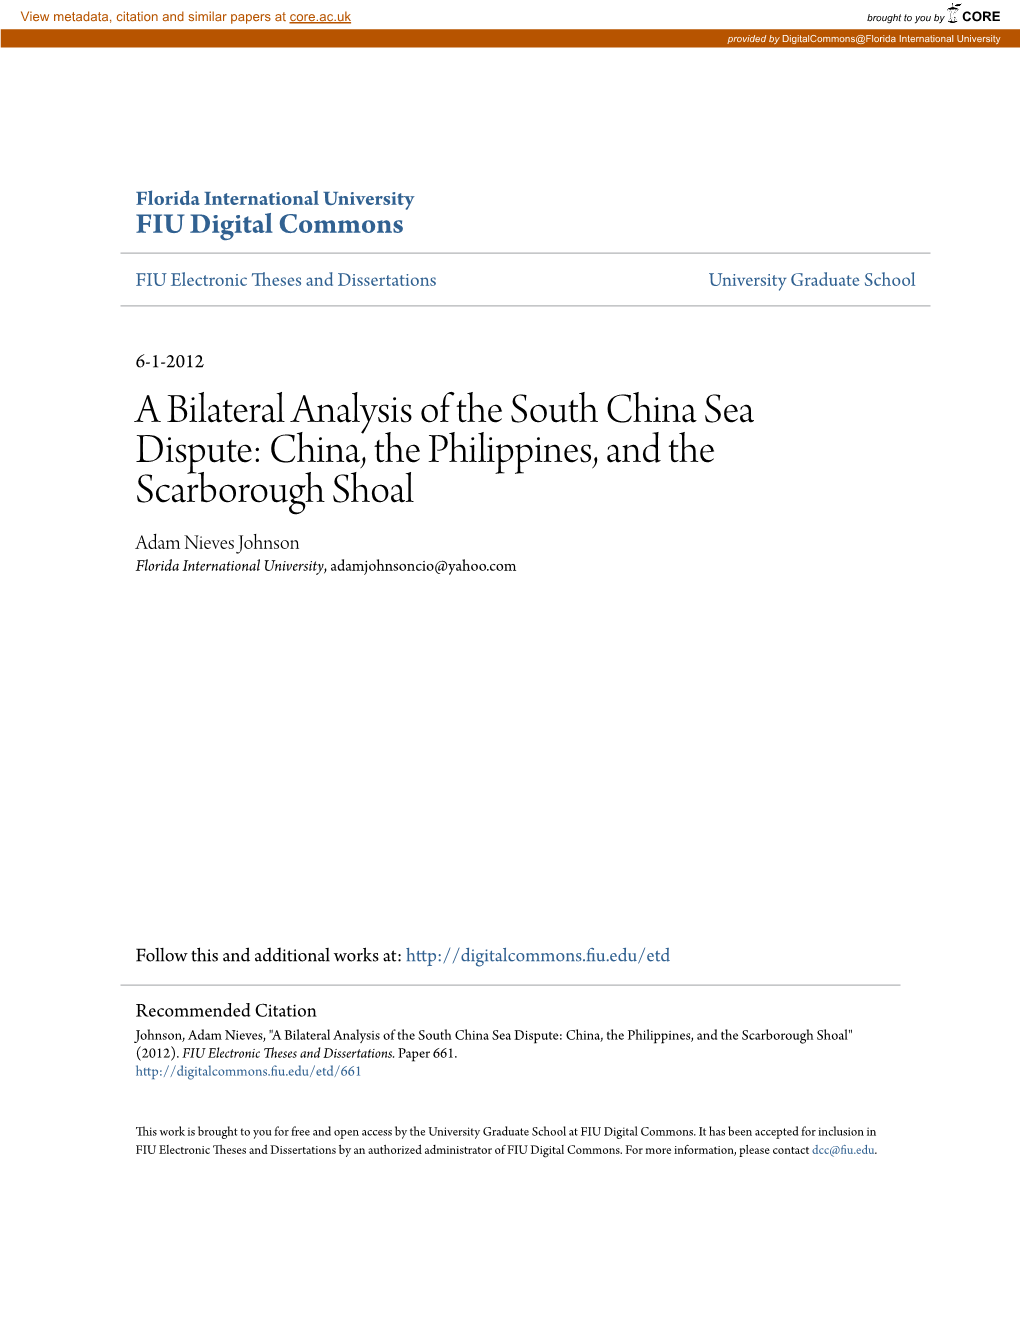 A Bilateral Analysis of the South China Sea Dispute